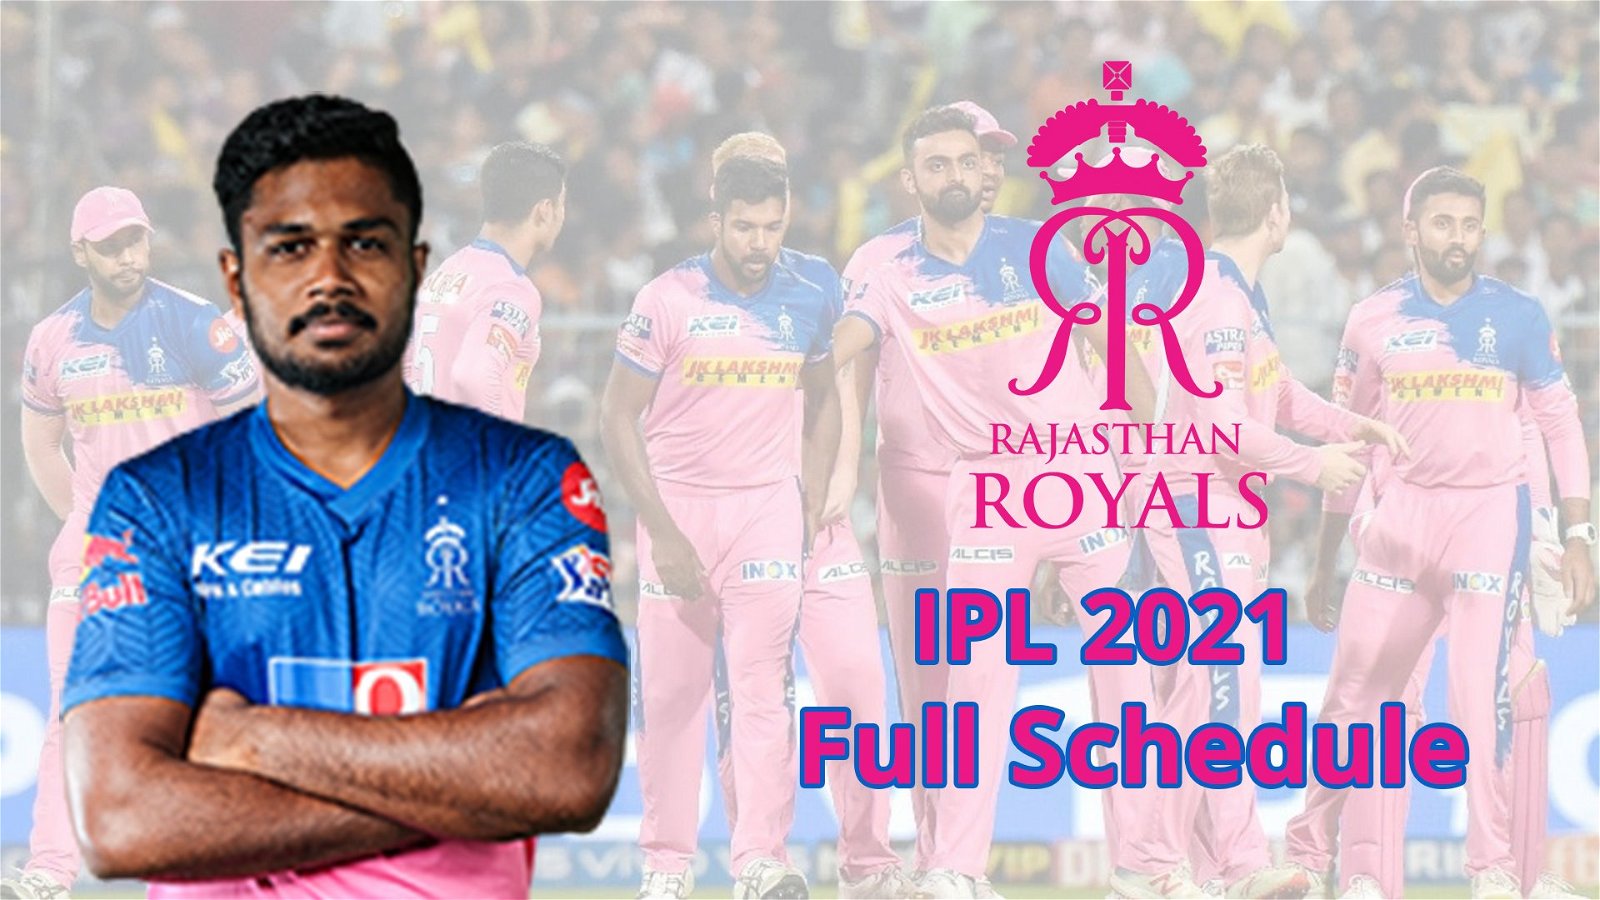 IPL 2021: Complete Schedule Of Rajasthan Royals (RR) For The Tournament